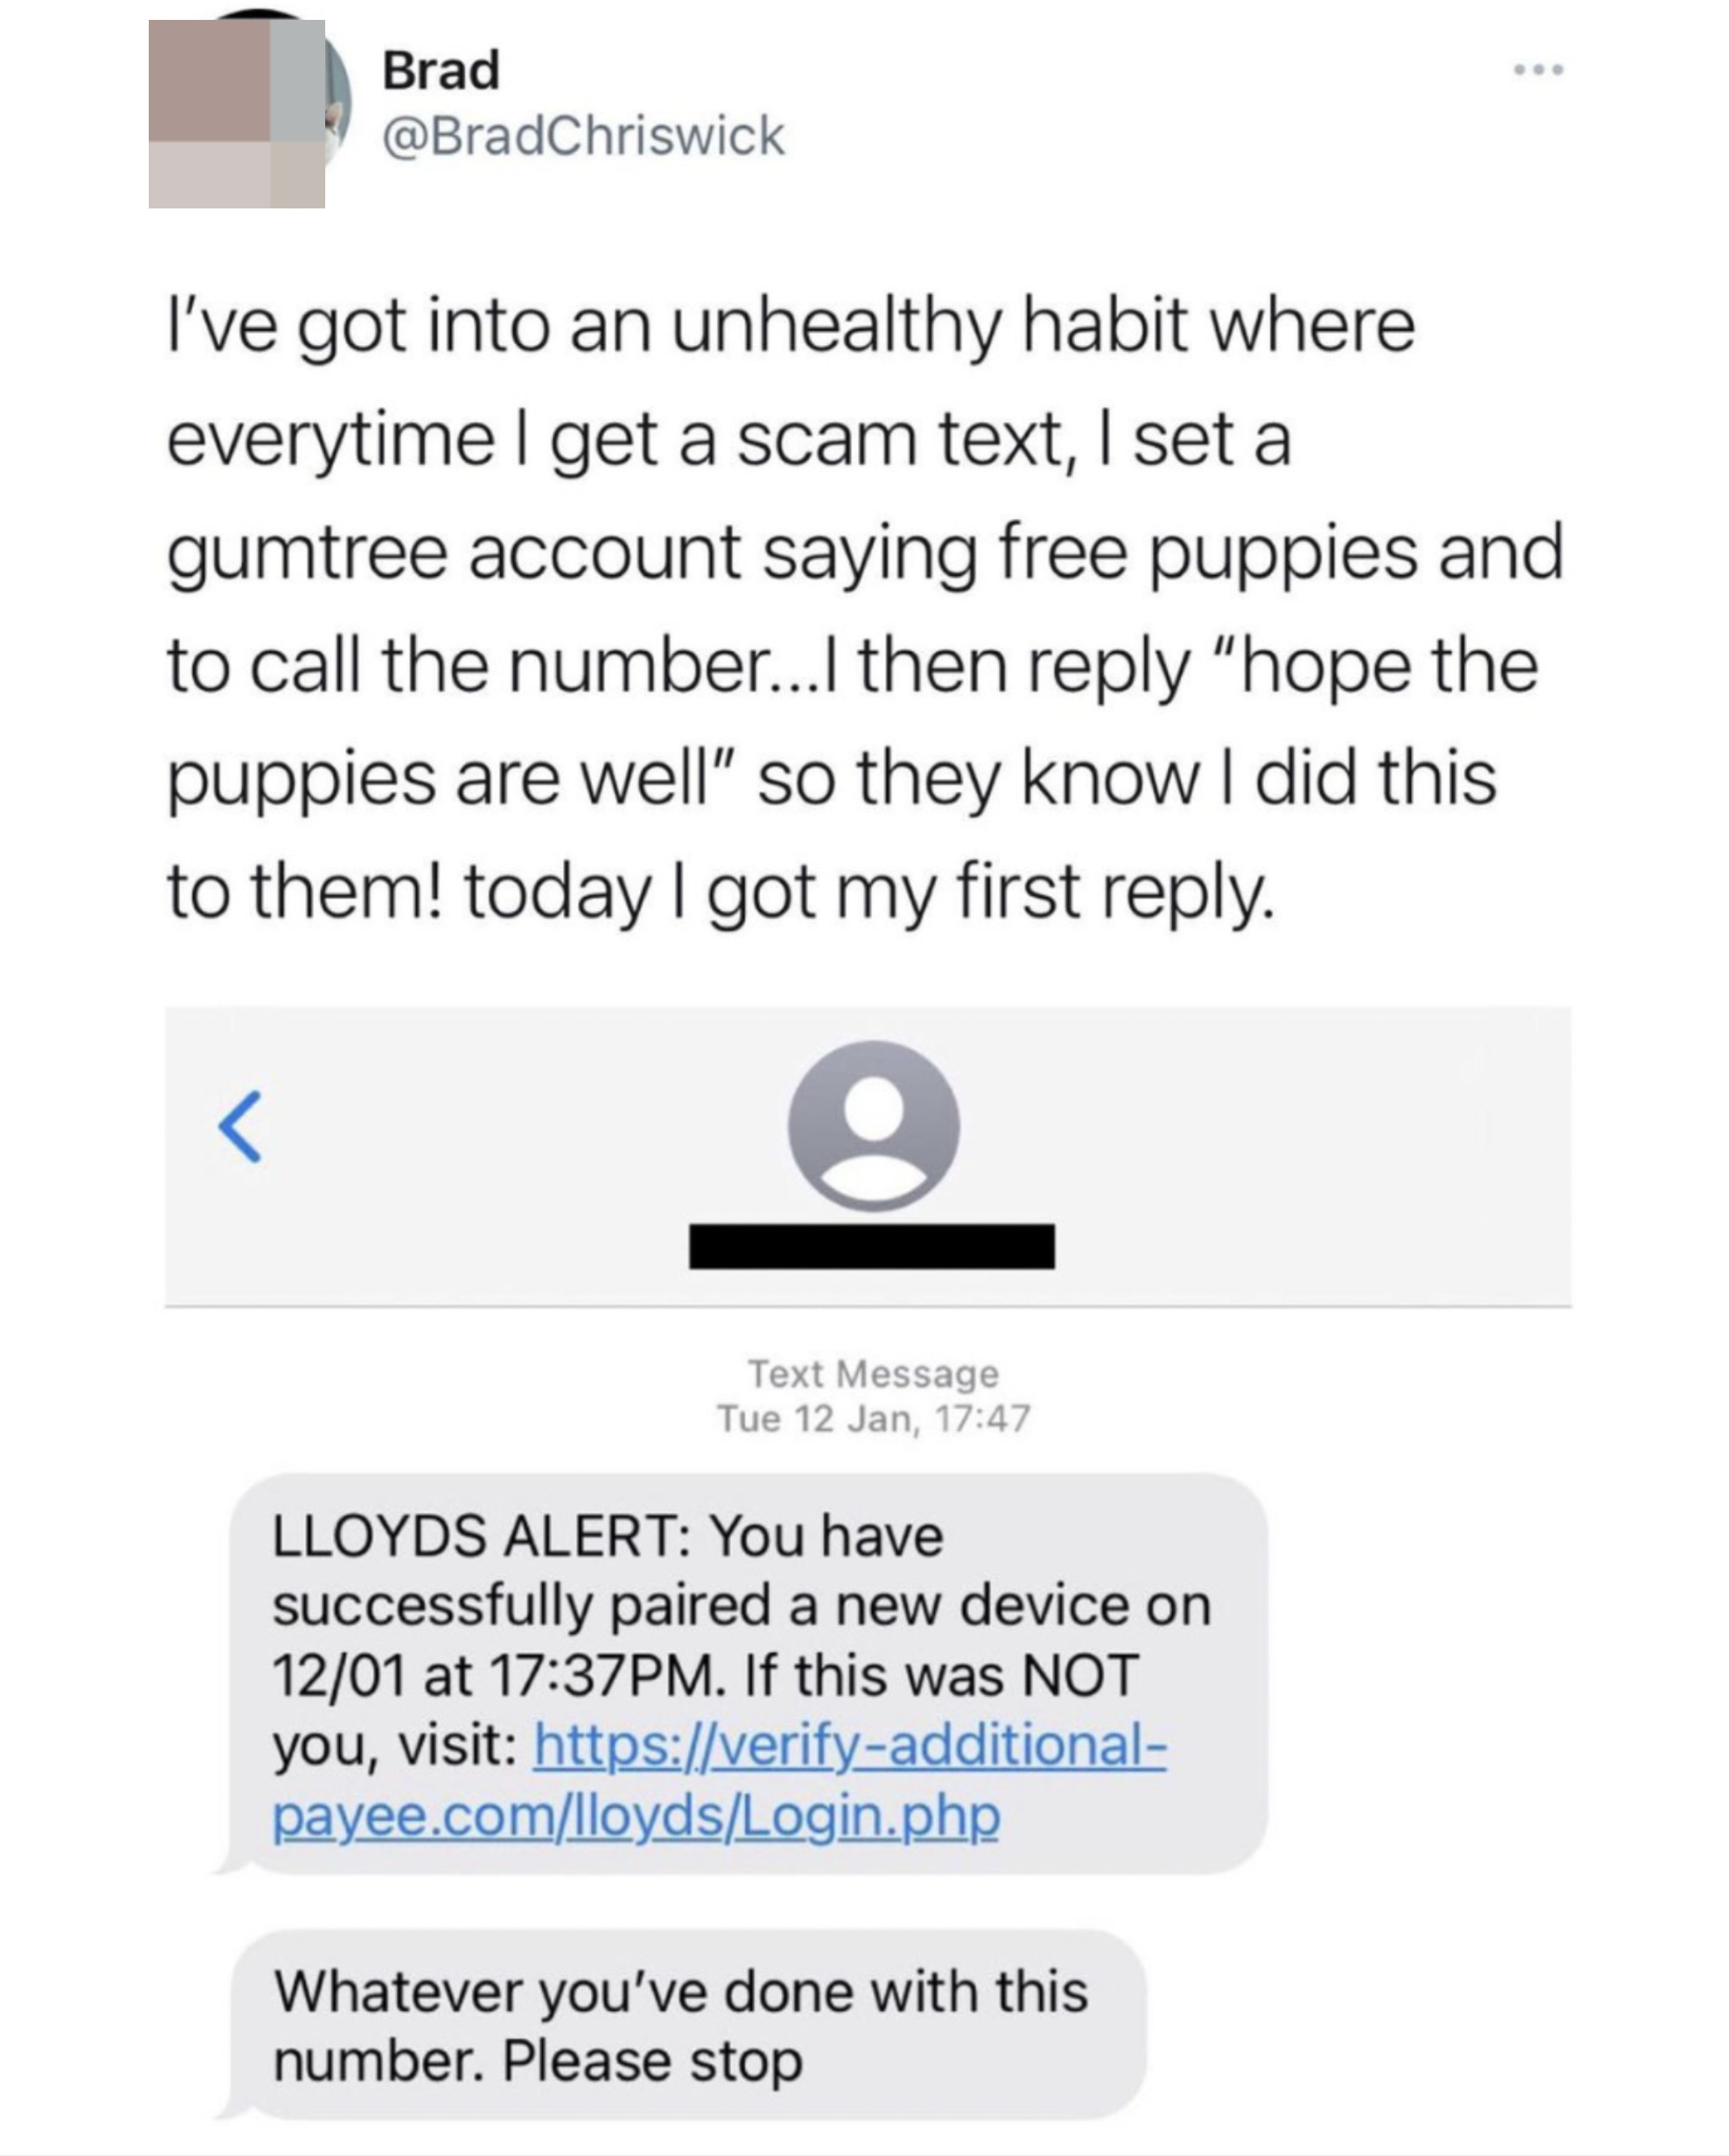 a person who sets up scammers&#x27; numbers with free puppy offers, and a scammer responding, &quot;Whatever you&#x27;ve done with this number please stop&quot;